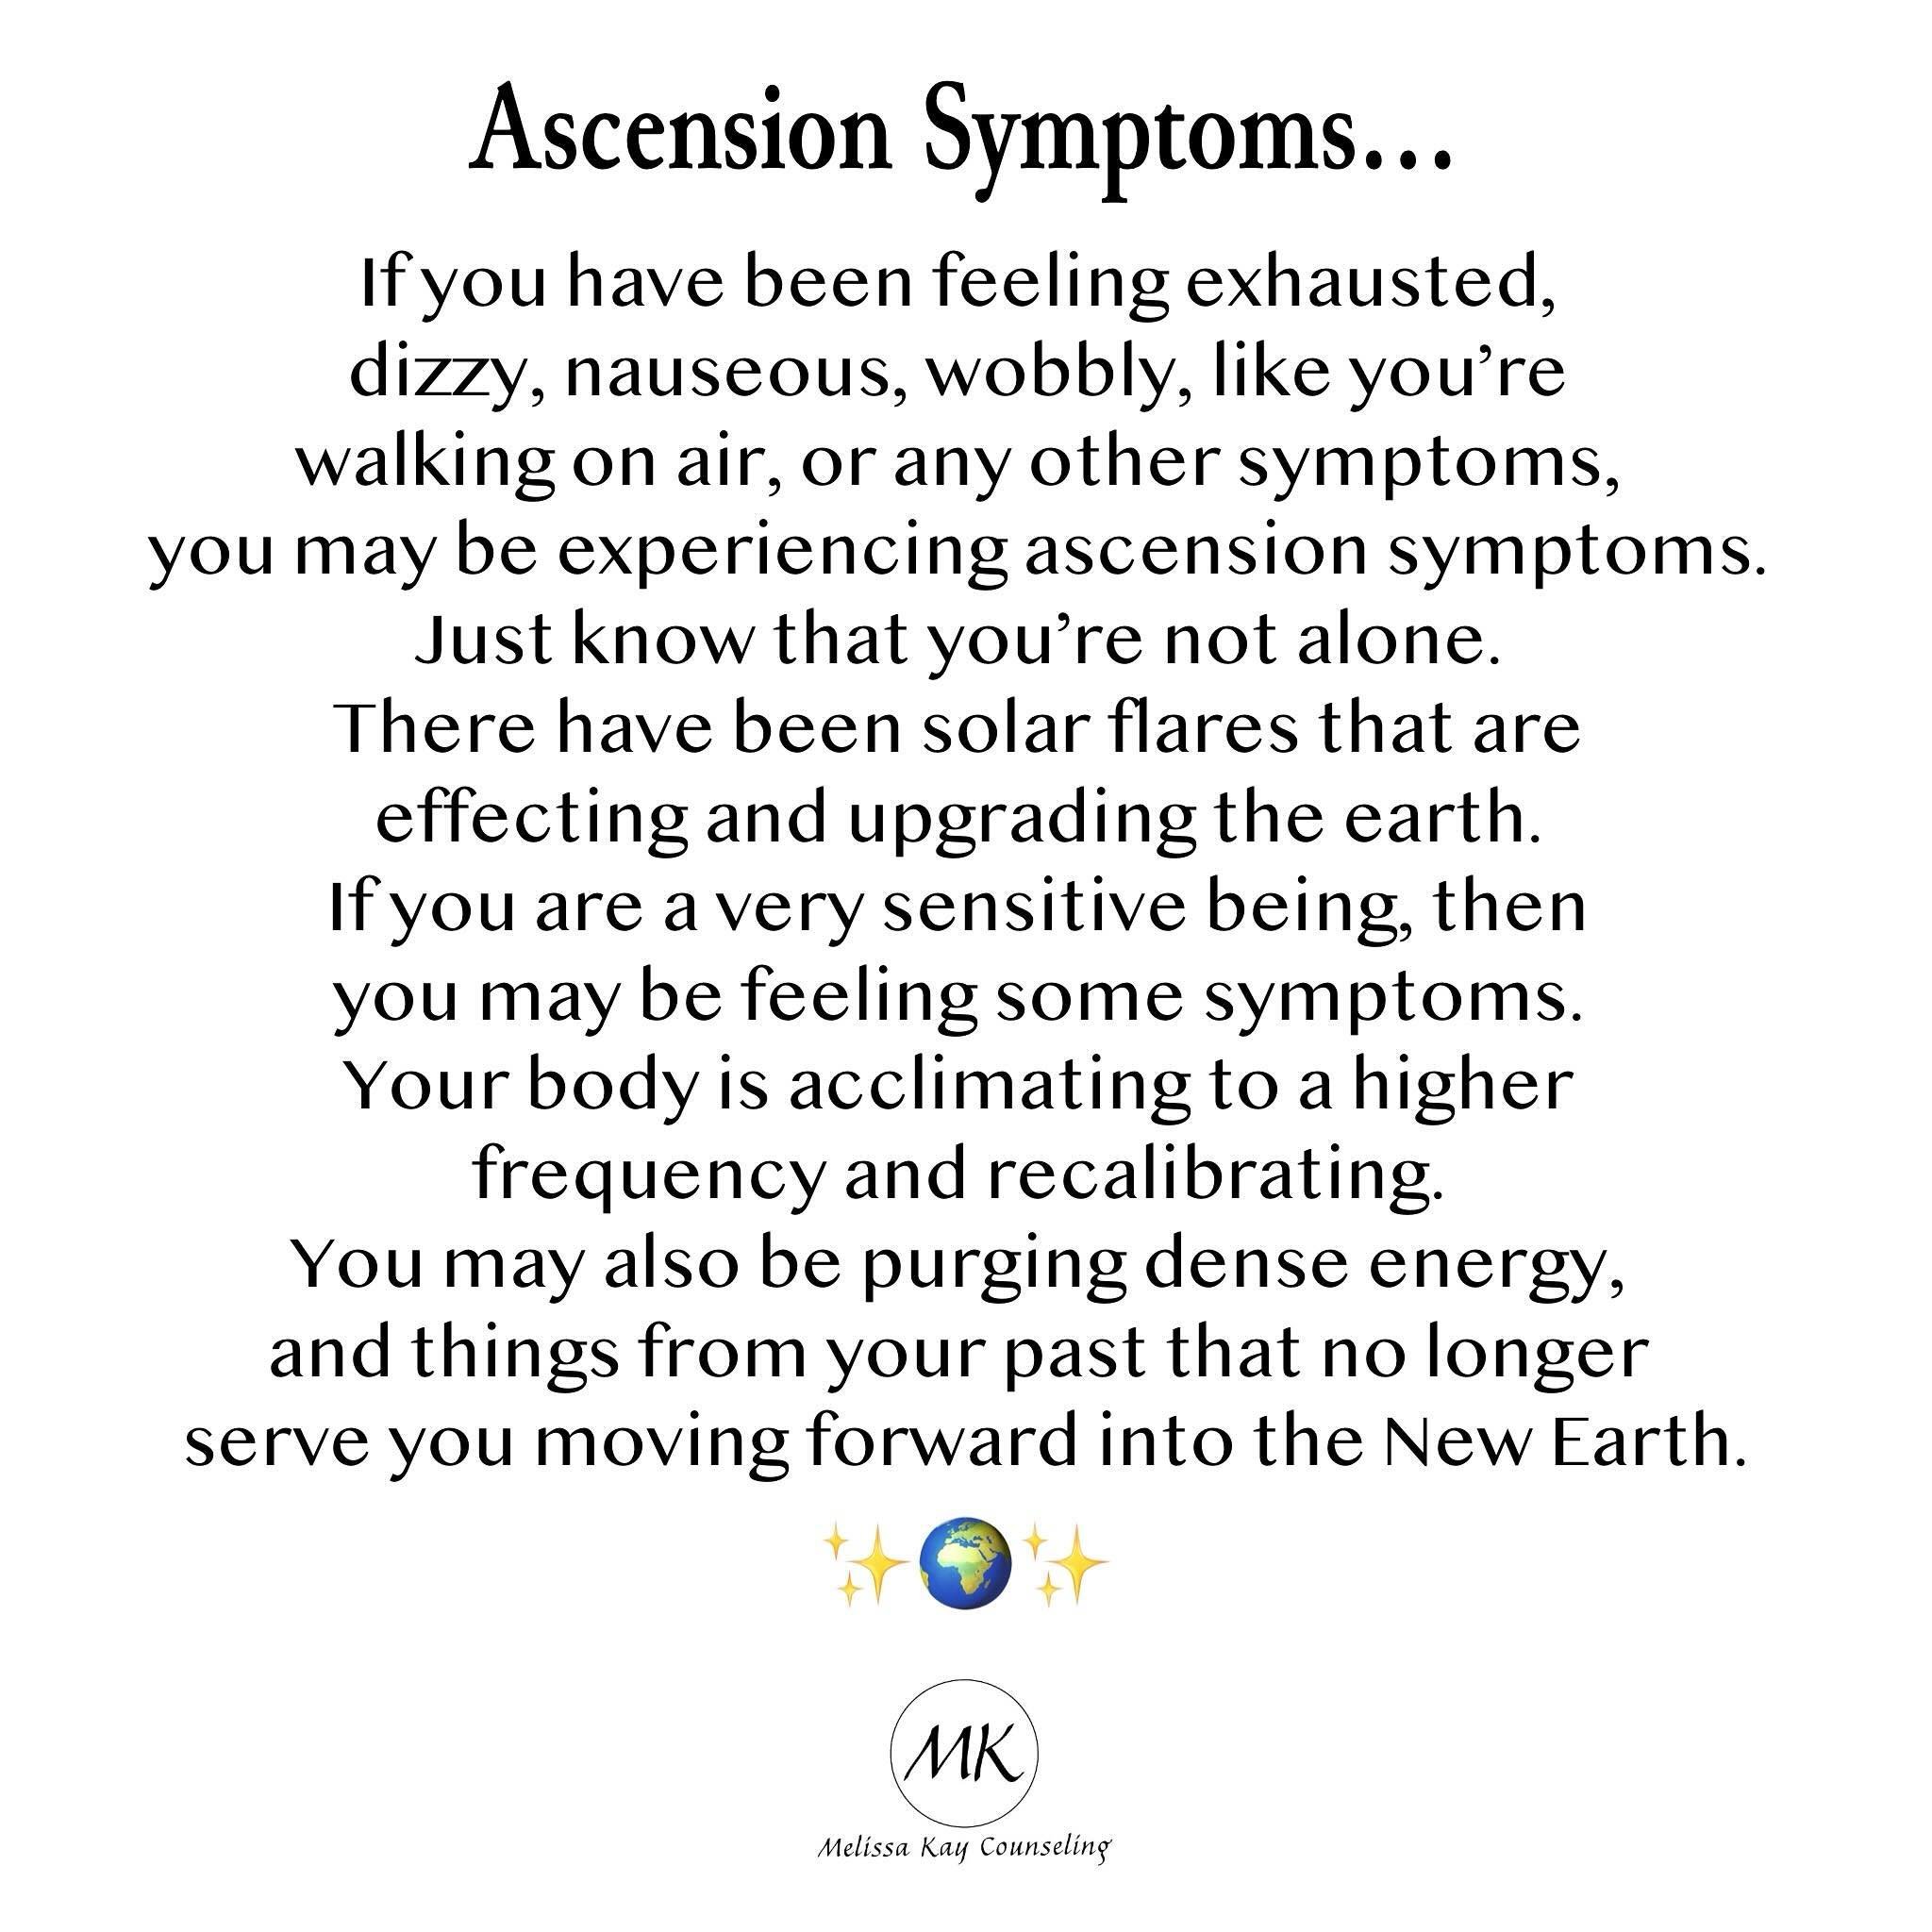 I have been feeling off in my body for a few weeks now. I&rsquo;m starting to feel better. But I recognize that the symptoms are not illness, but ascension symptoms. It&rsquo;s important to check in with your body and see what you&rsquo;re feeling. G